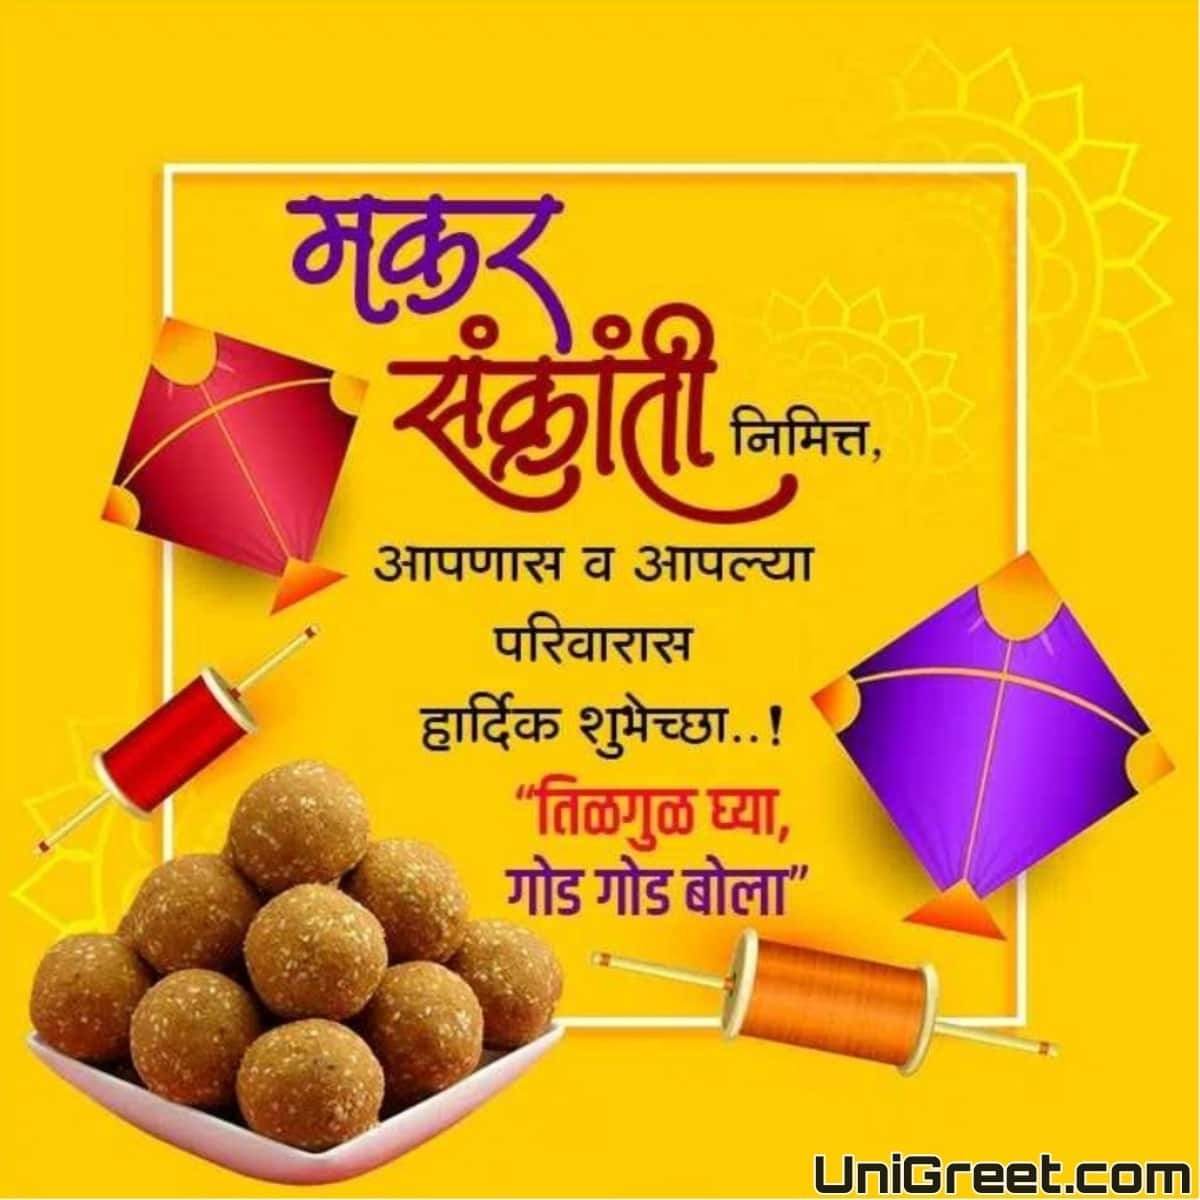 Happy Makar Sankranti Background Images, HD Pictures and Wallpaper For Free  Download | Pngtree